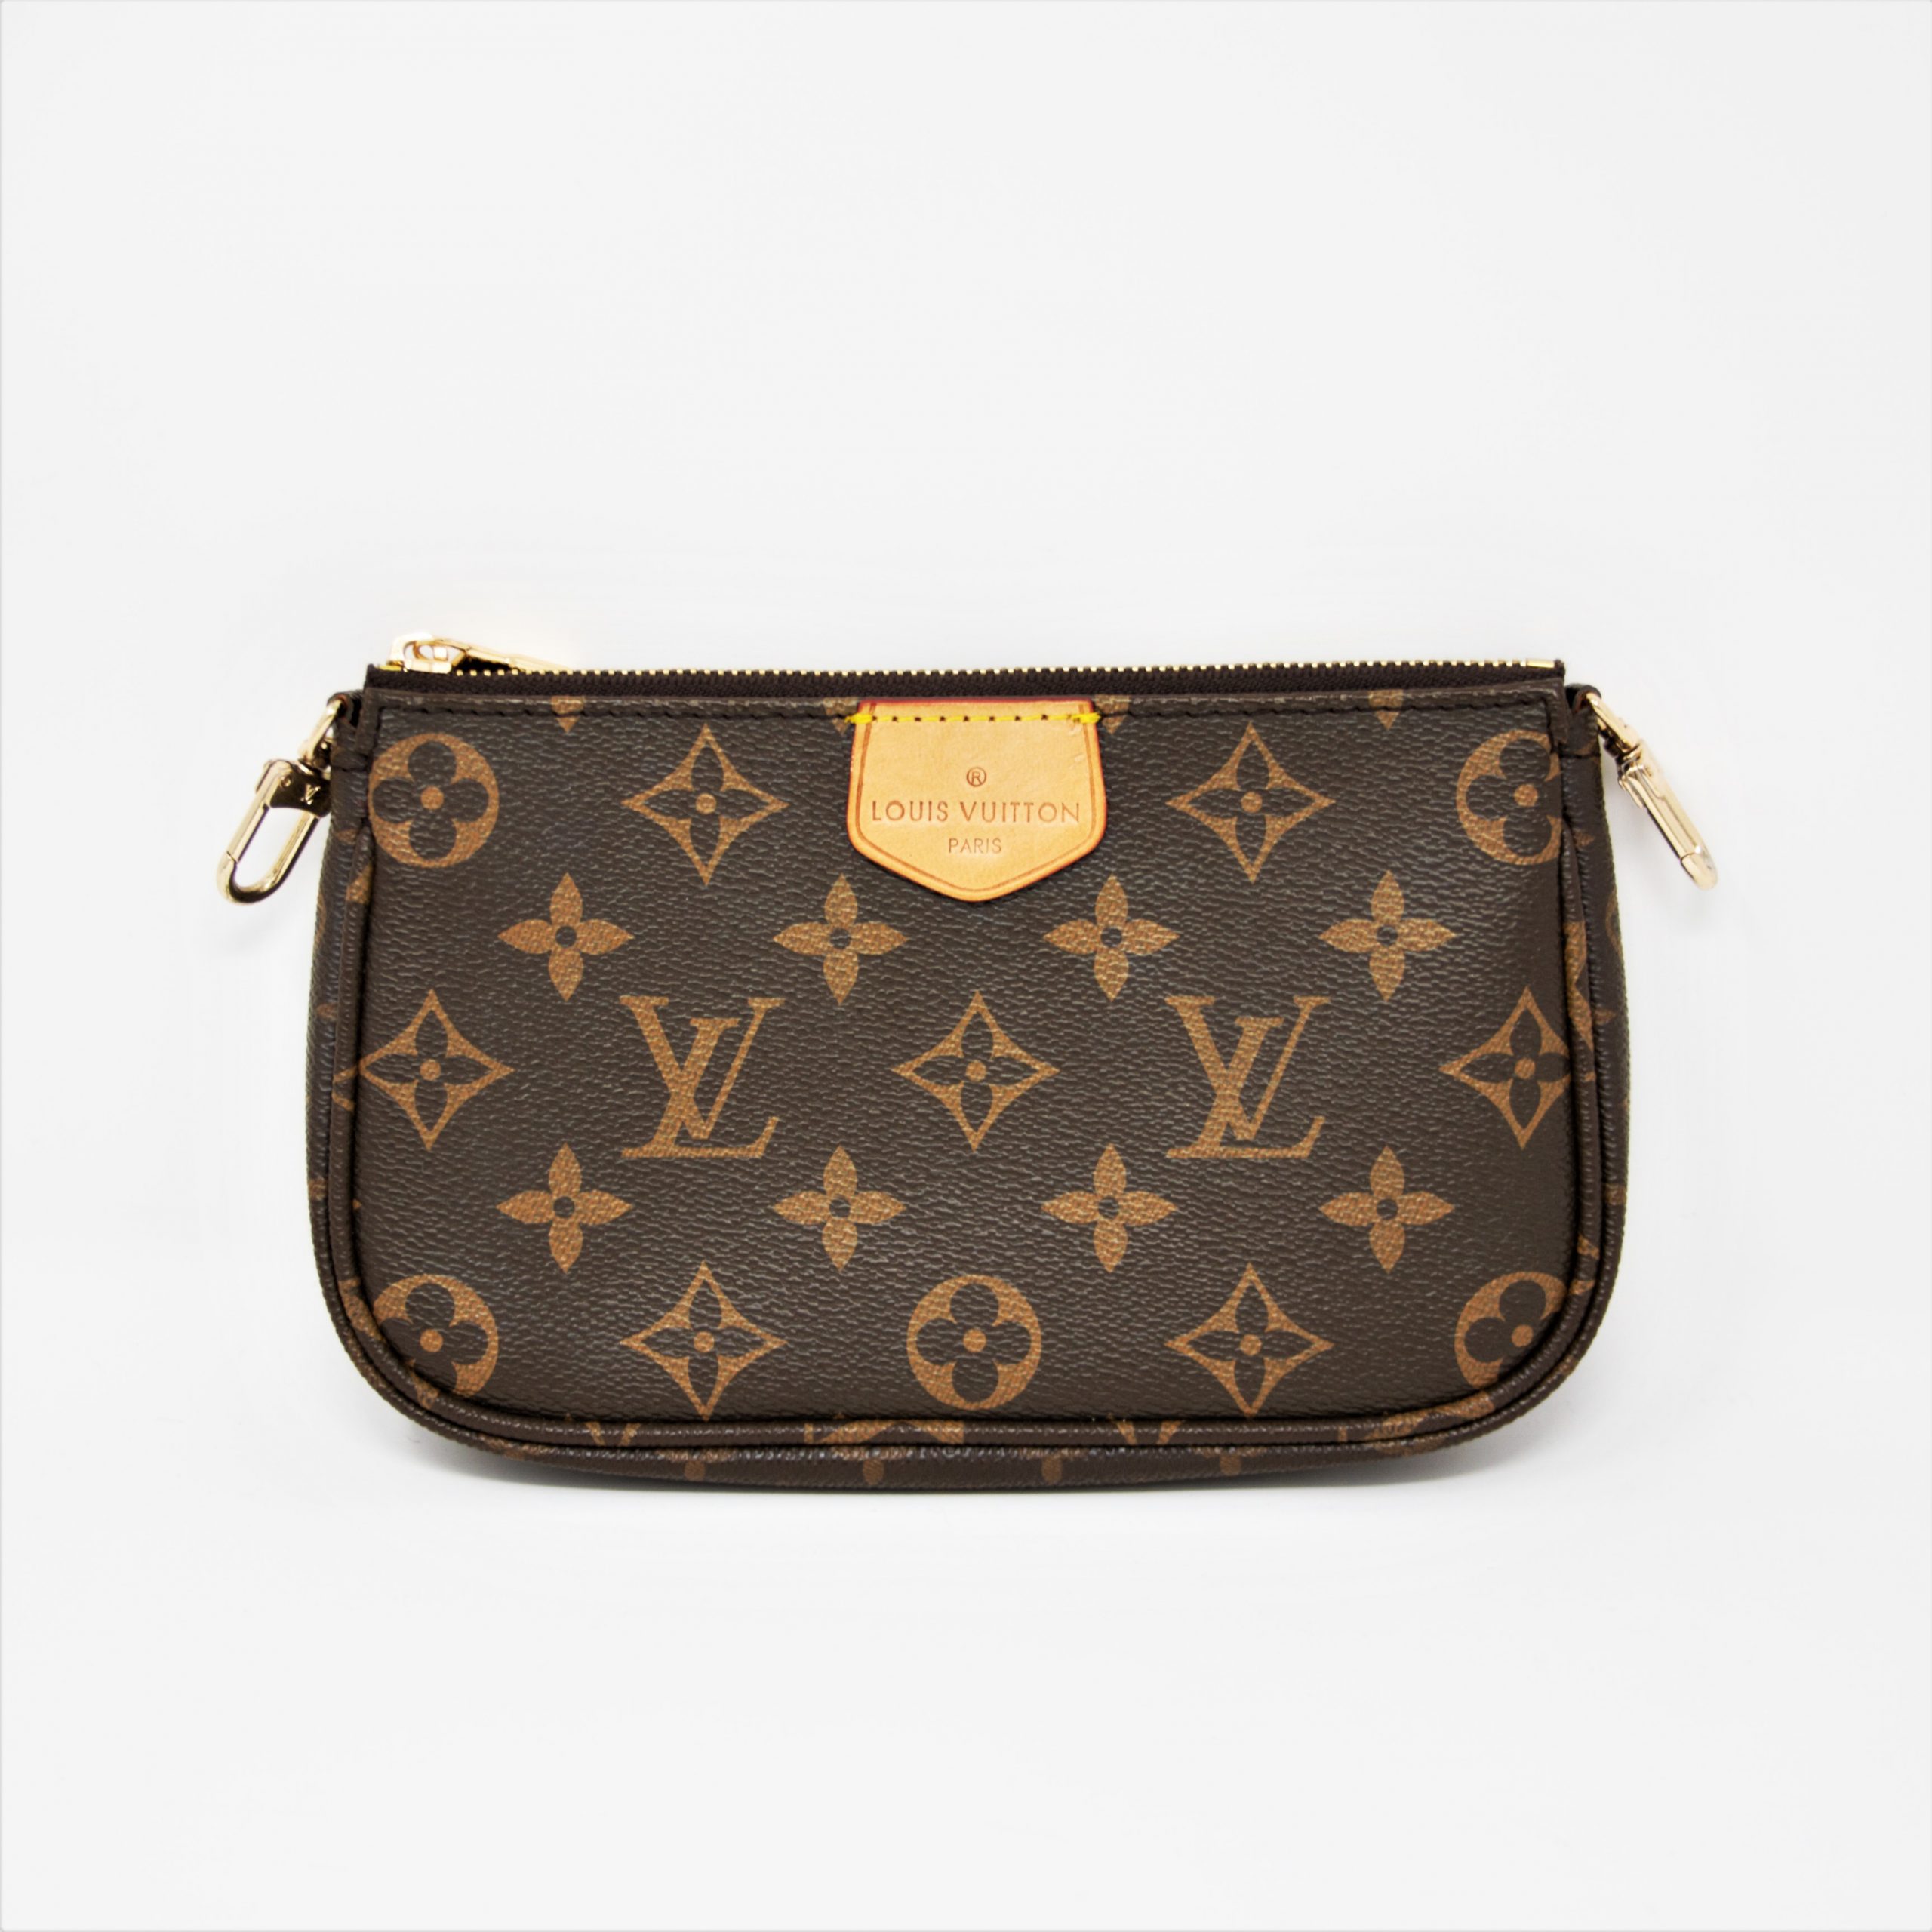 louis vuitton purse with green strap